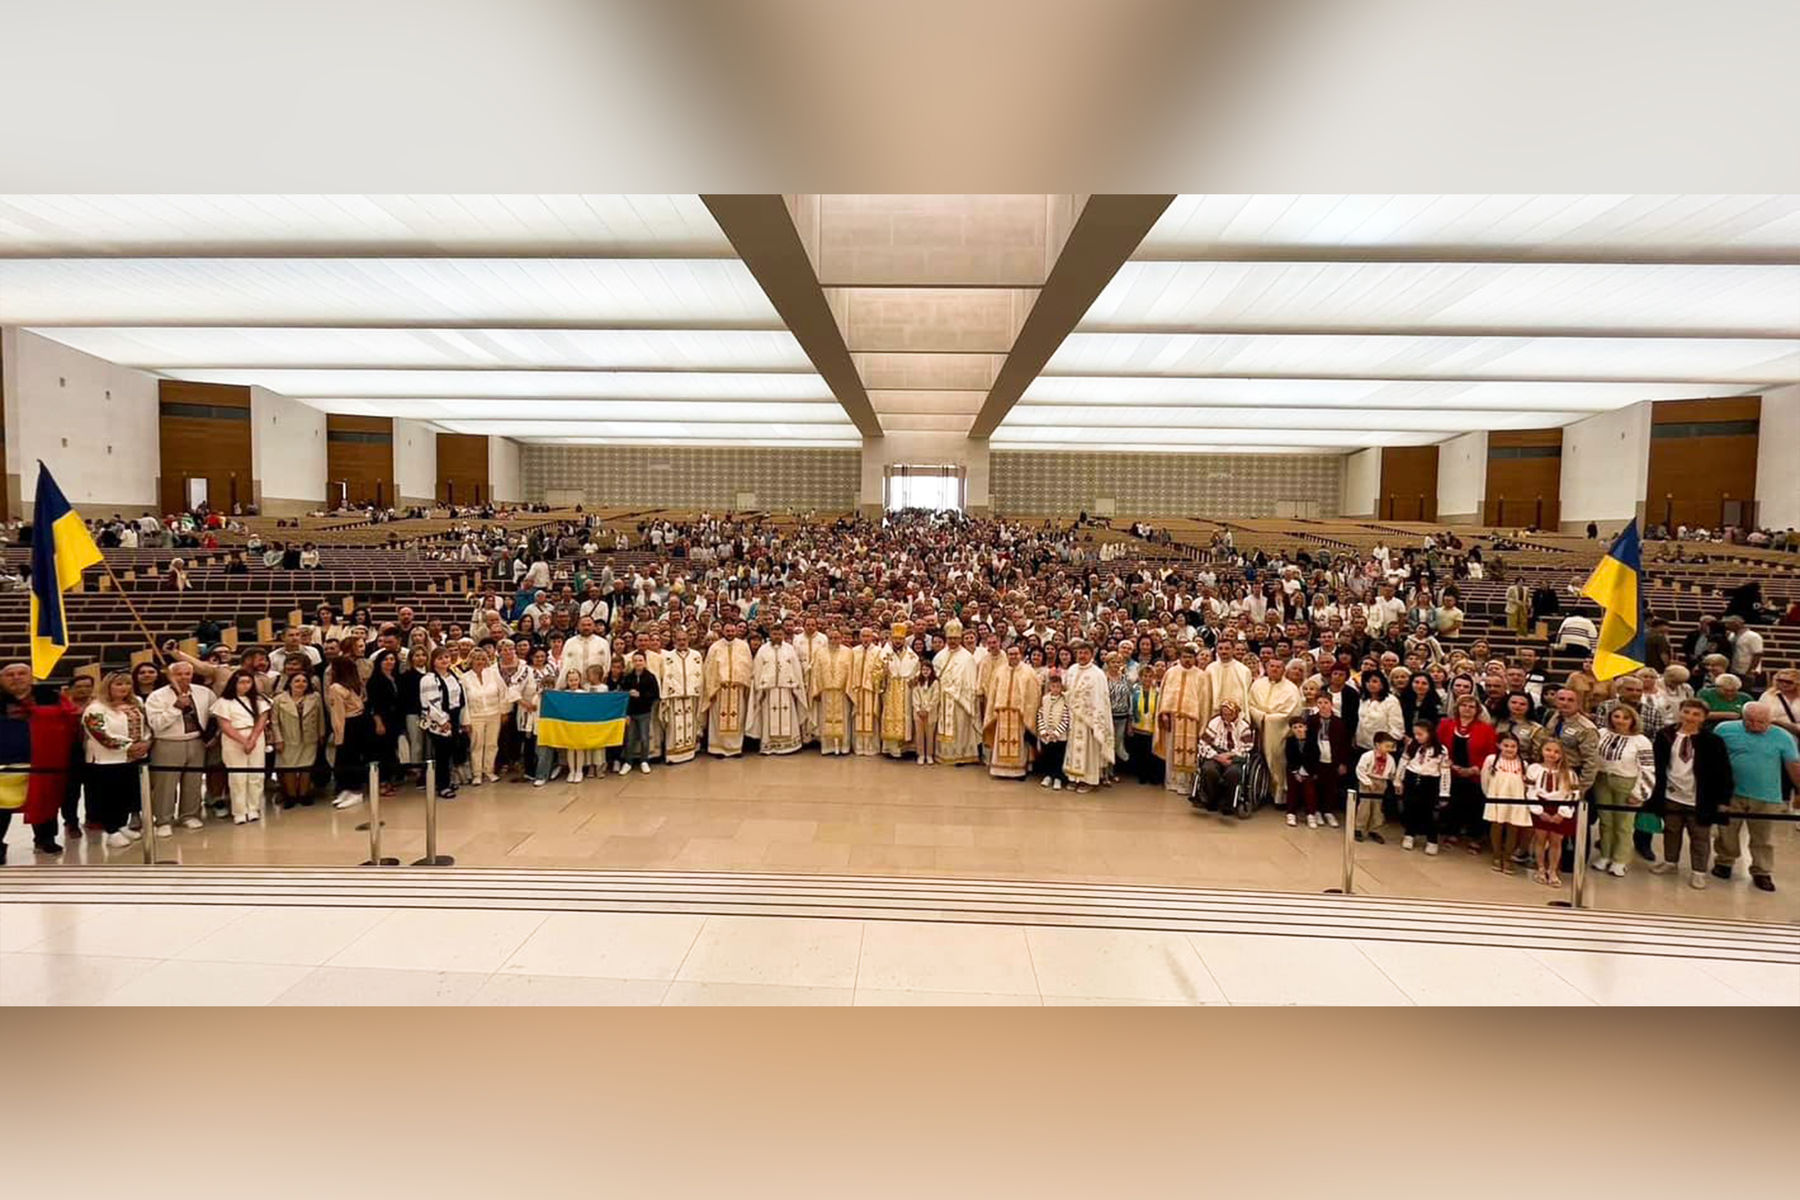 Nearly 5000 Ukrainians participated in the pilgrimage to Fatima